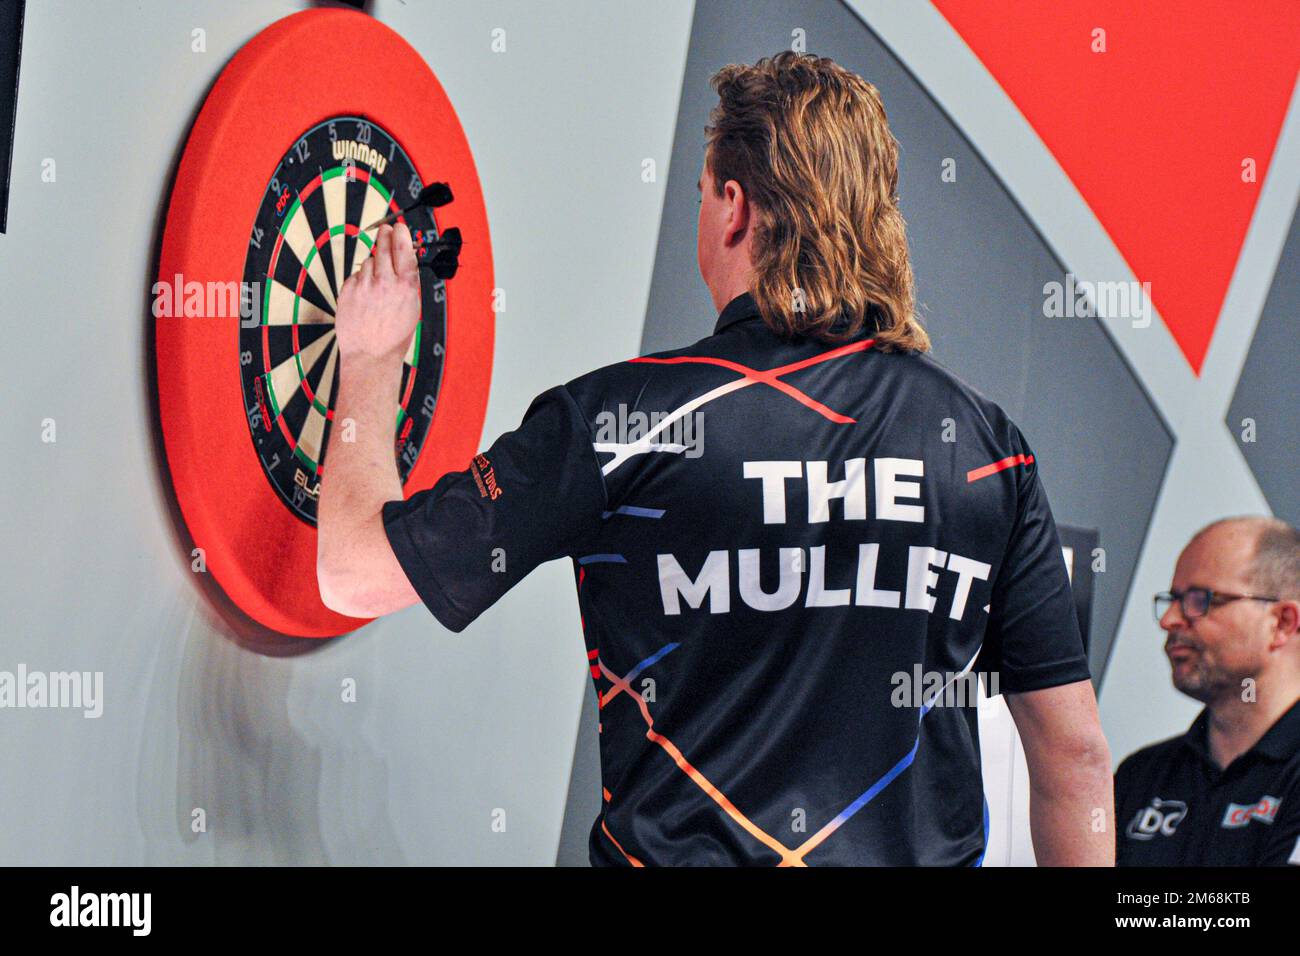 LONDON, ENGLAND - DECEMBER 19: Danny Jansen of the Netherlands looks on  during Day Five of the Cazoo World Darts Championship at Alexandra Palace  on December 12, 2022 in London, England. (Photo